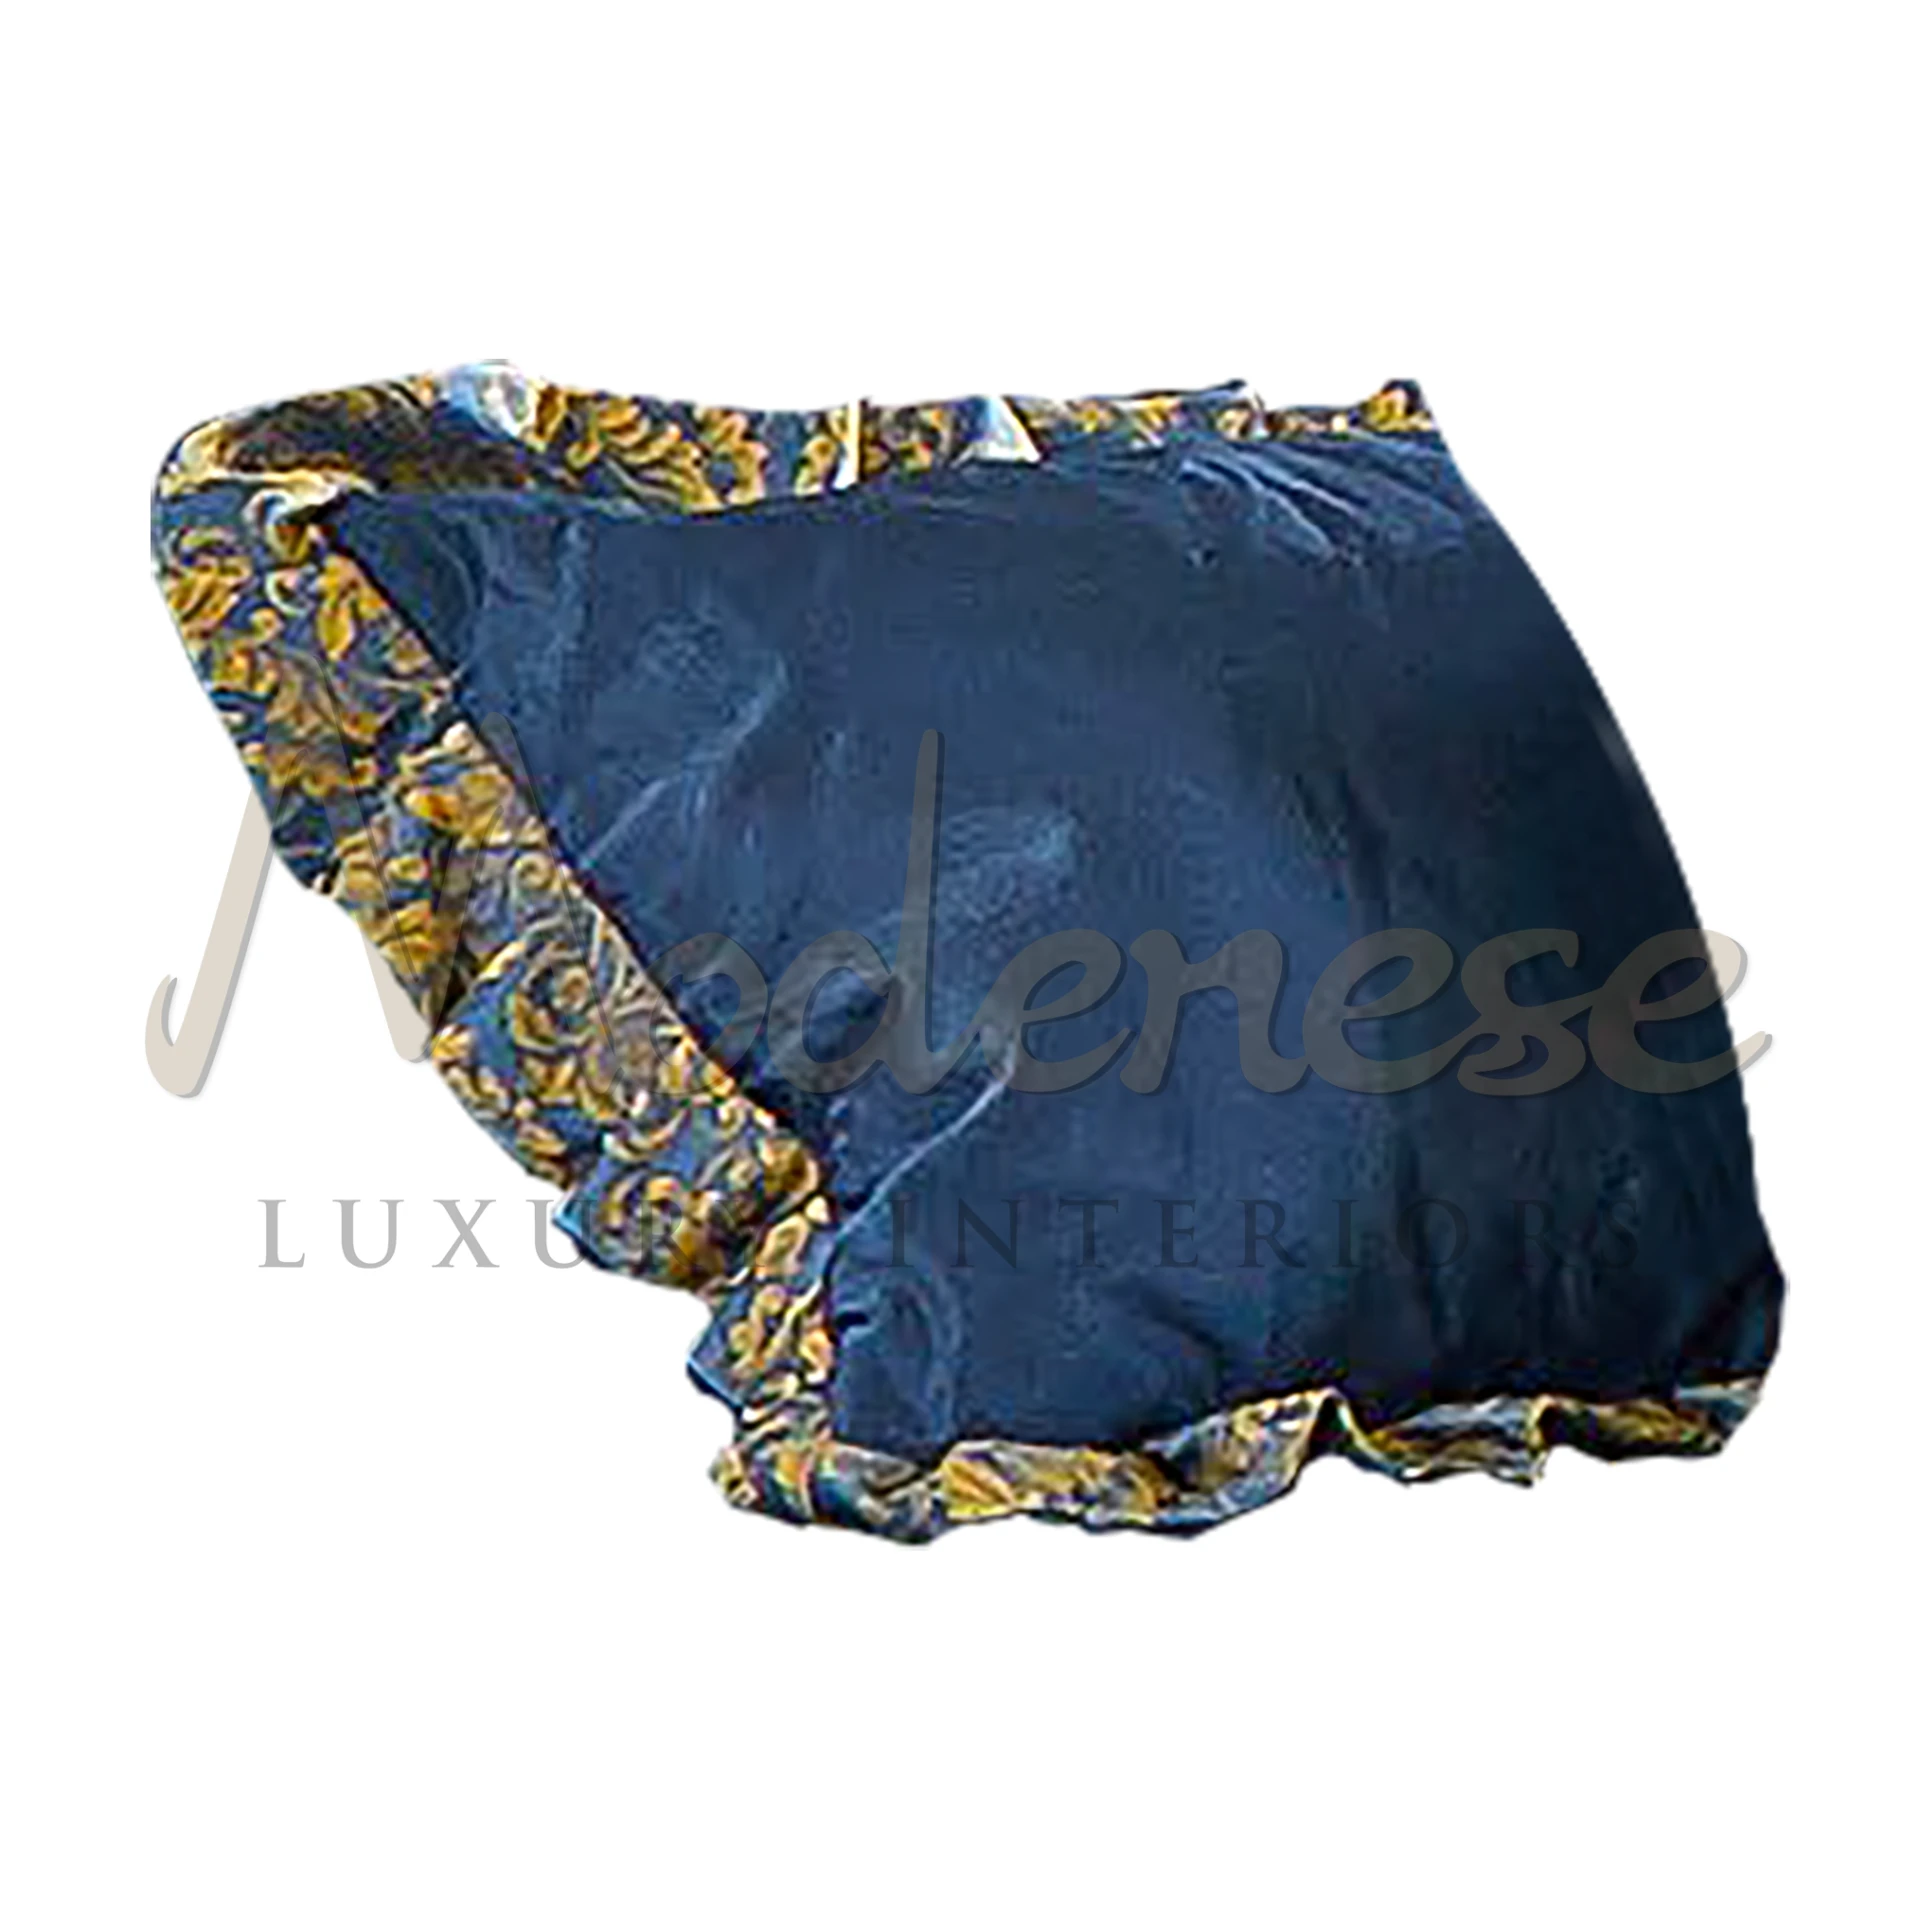 Classical Blue Pillow in serene and elegant blue, embodying tranquility and Italian luxury textile craftsmanship.